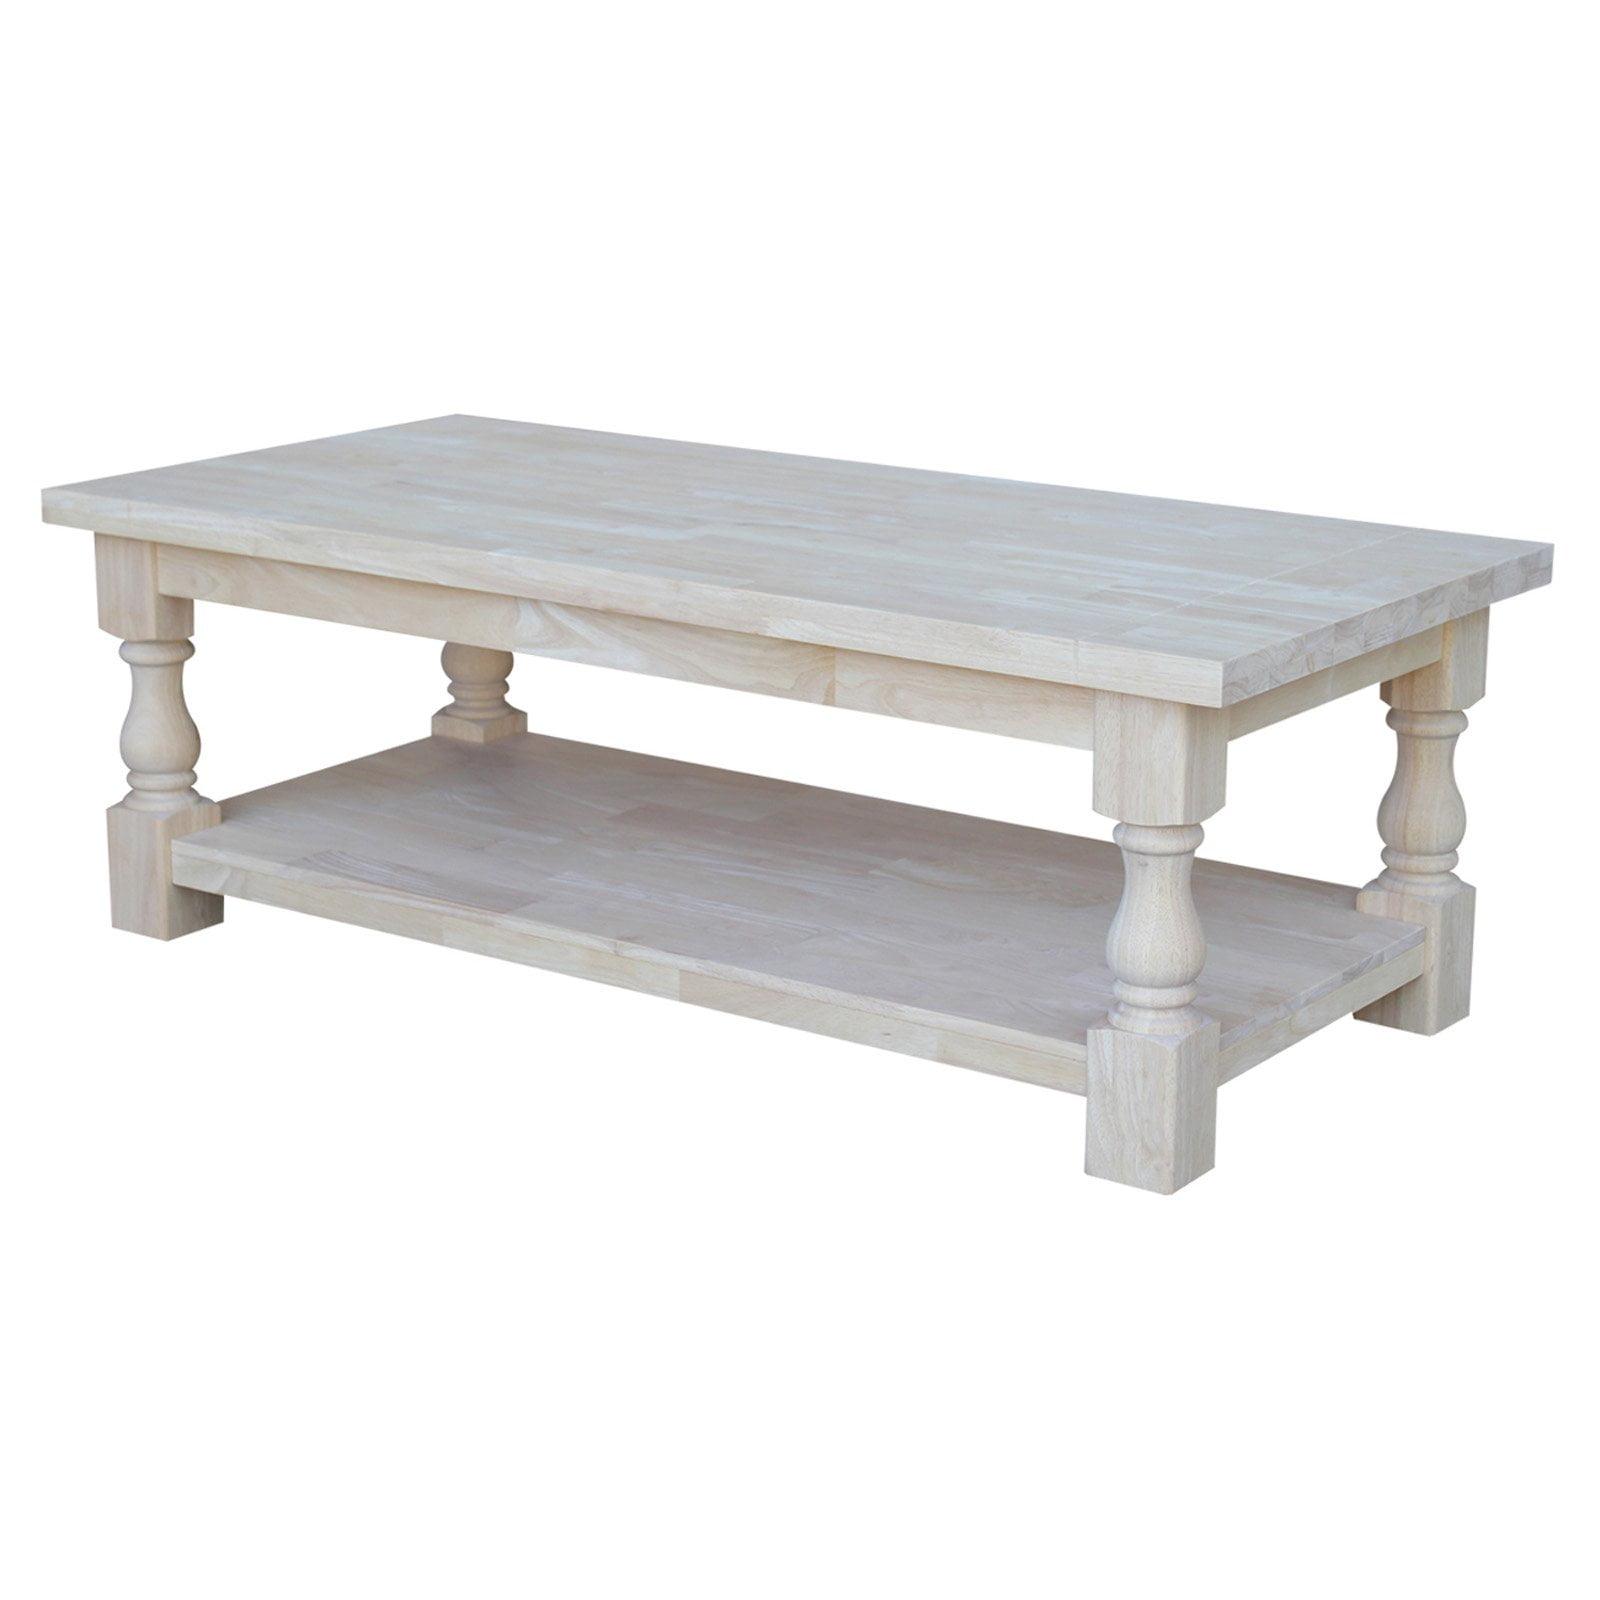 Tuscan Unfinished Solid Parawood Rectangular Coffee Table